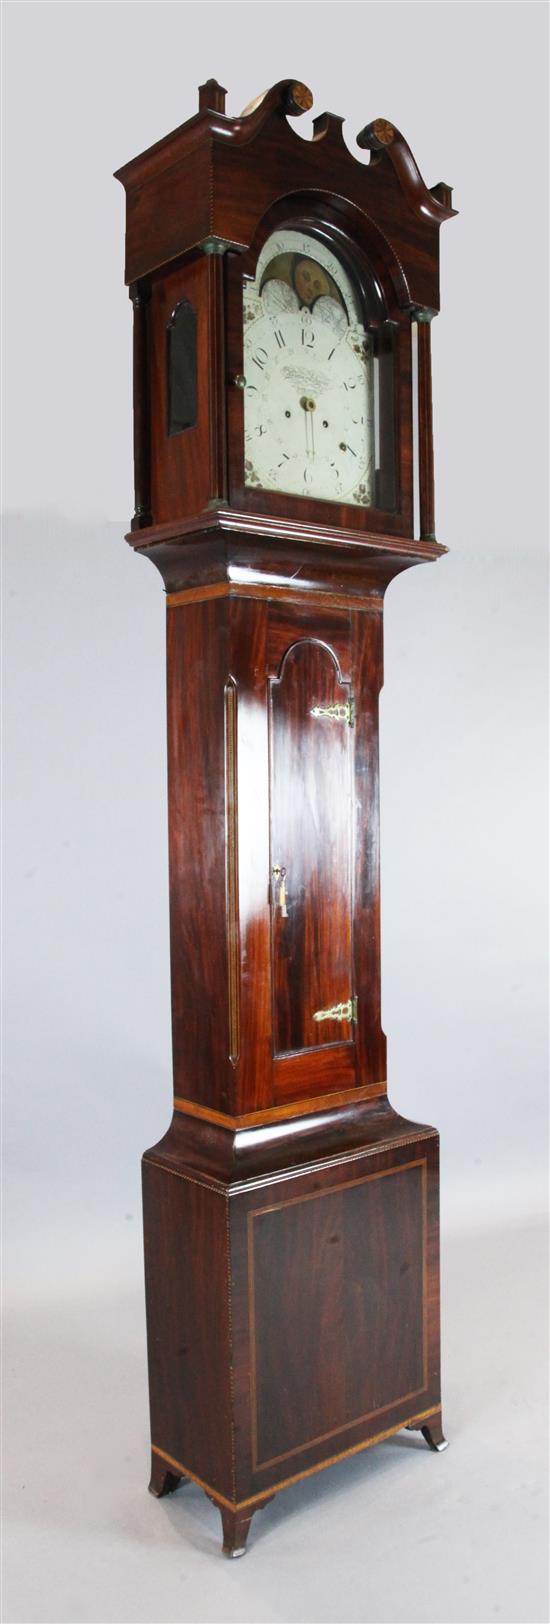 Martin Shreiner of Lancaster. A Federal American mahogany eight day longcase clock, H.9ft